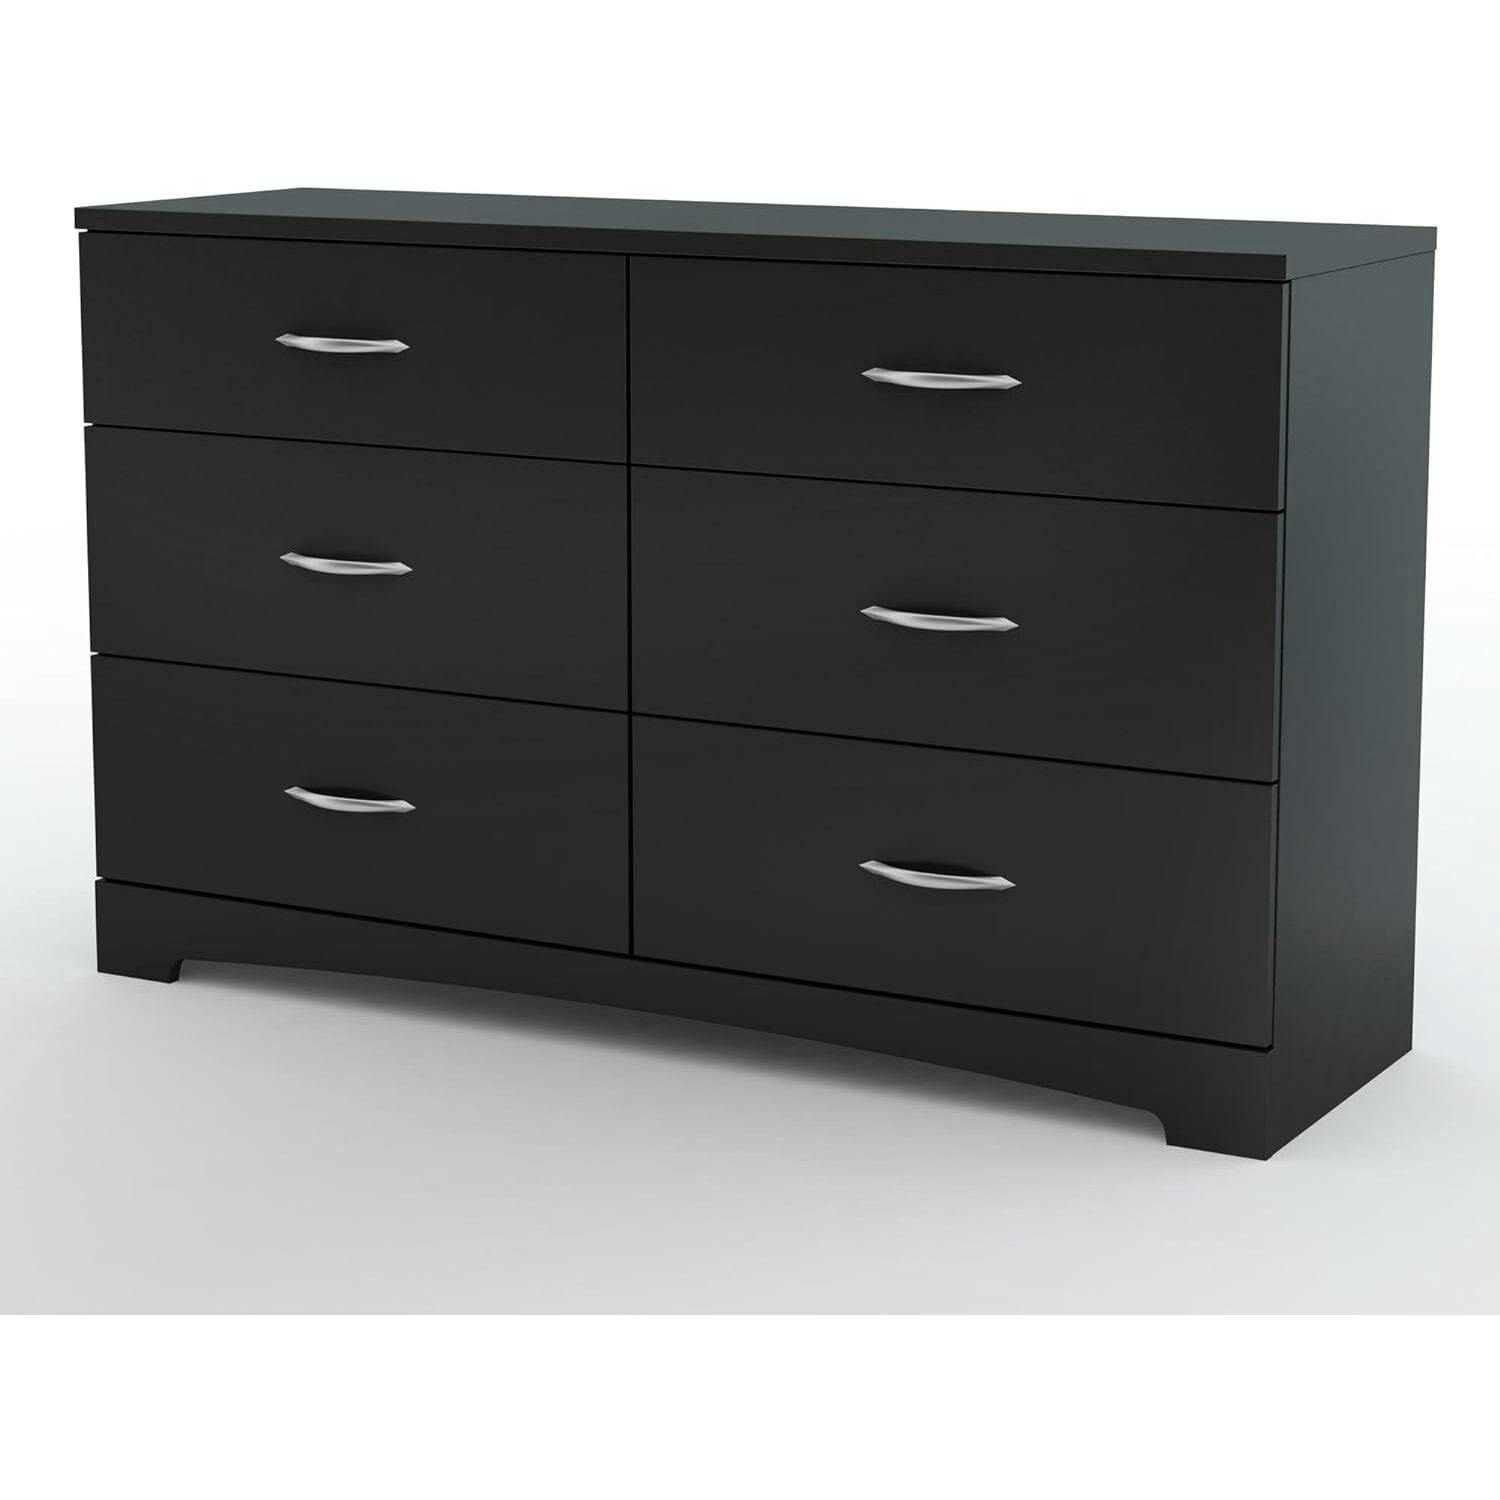 Transitional Pure Black 6-Drawer Double Dresser with Nickel Handles